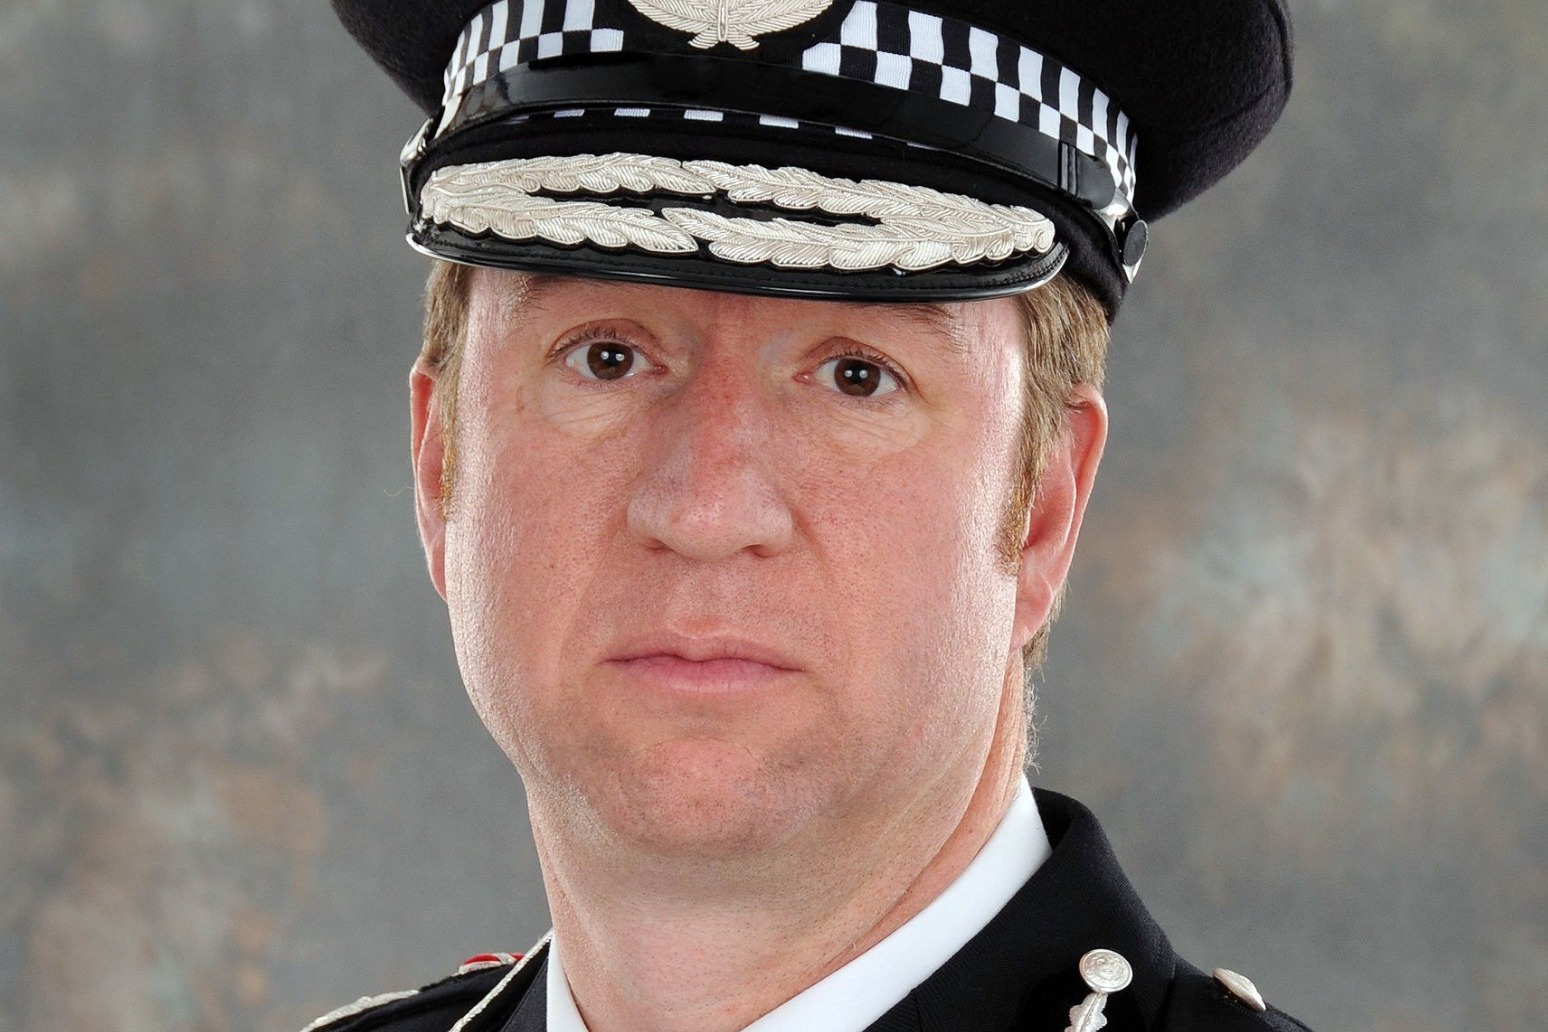 Police Chief warns of emerging group of paedophiles aged 18-26 